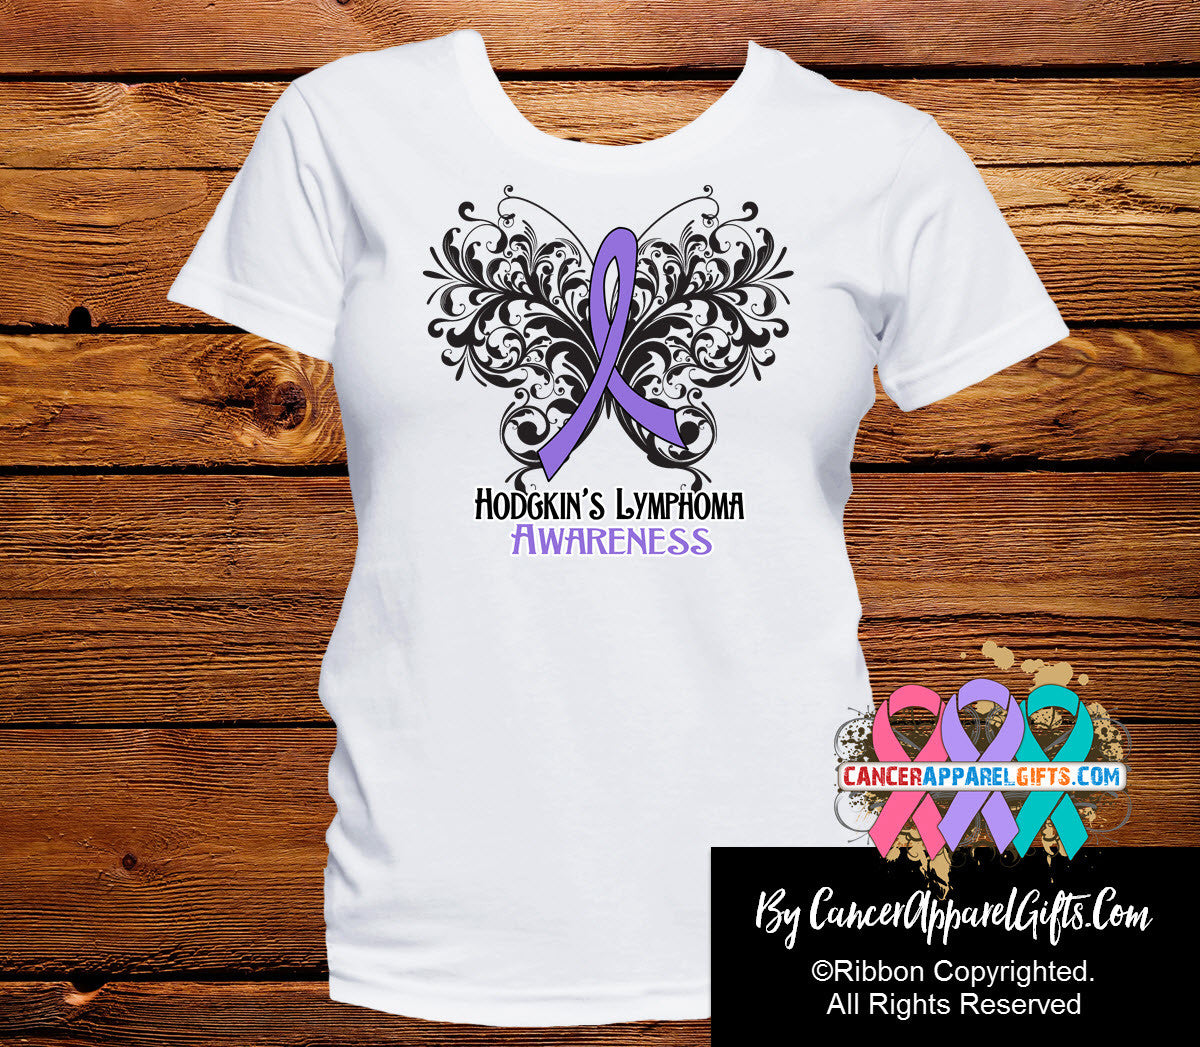 Hodgkins Lymphoma Butterfly Ribbon Shirts - Cancer Apparel and Gifts